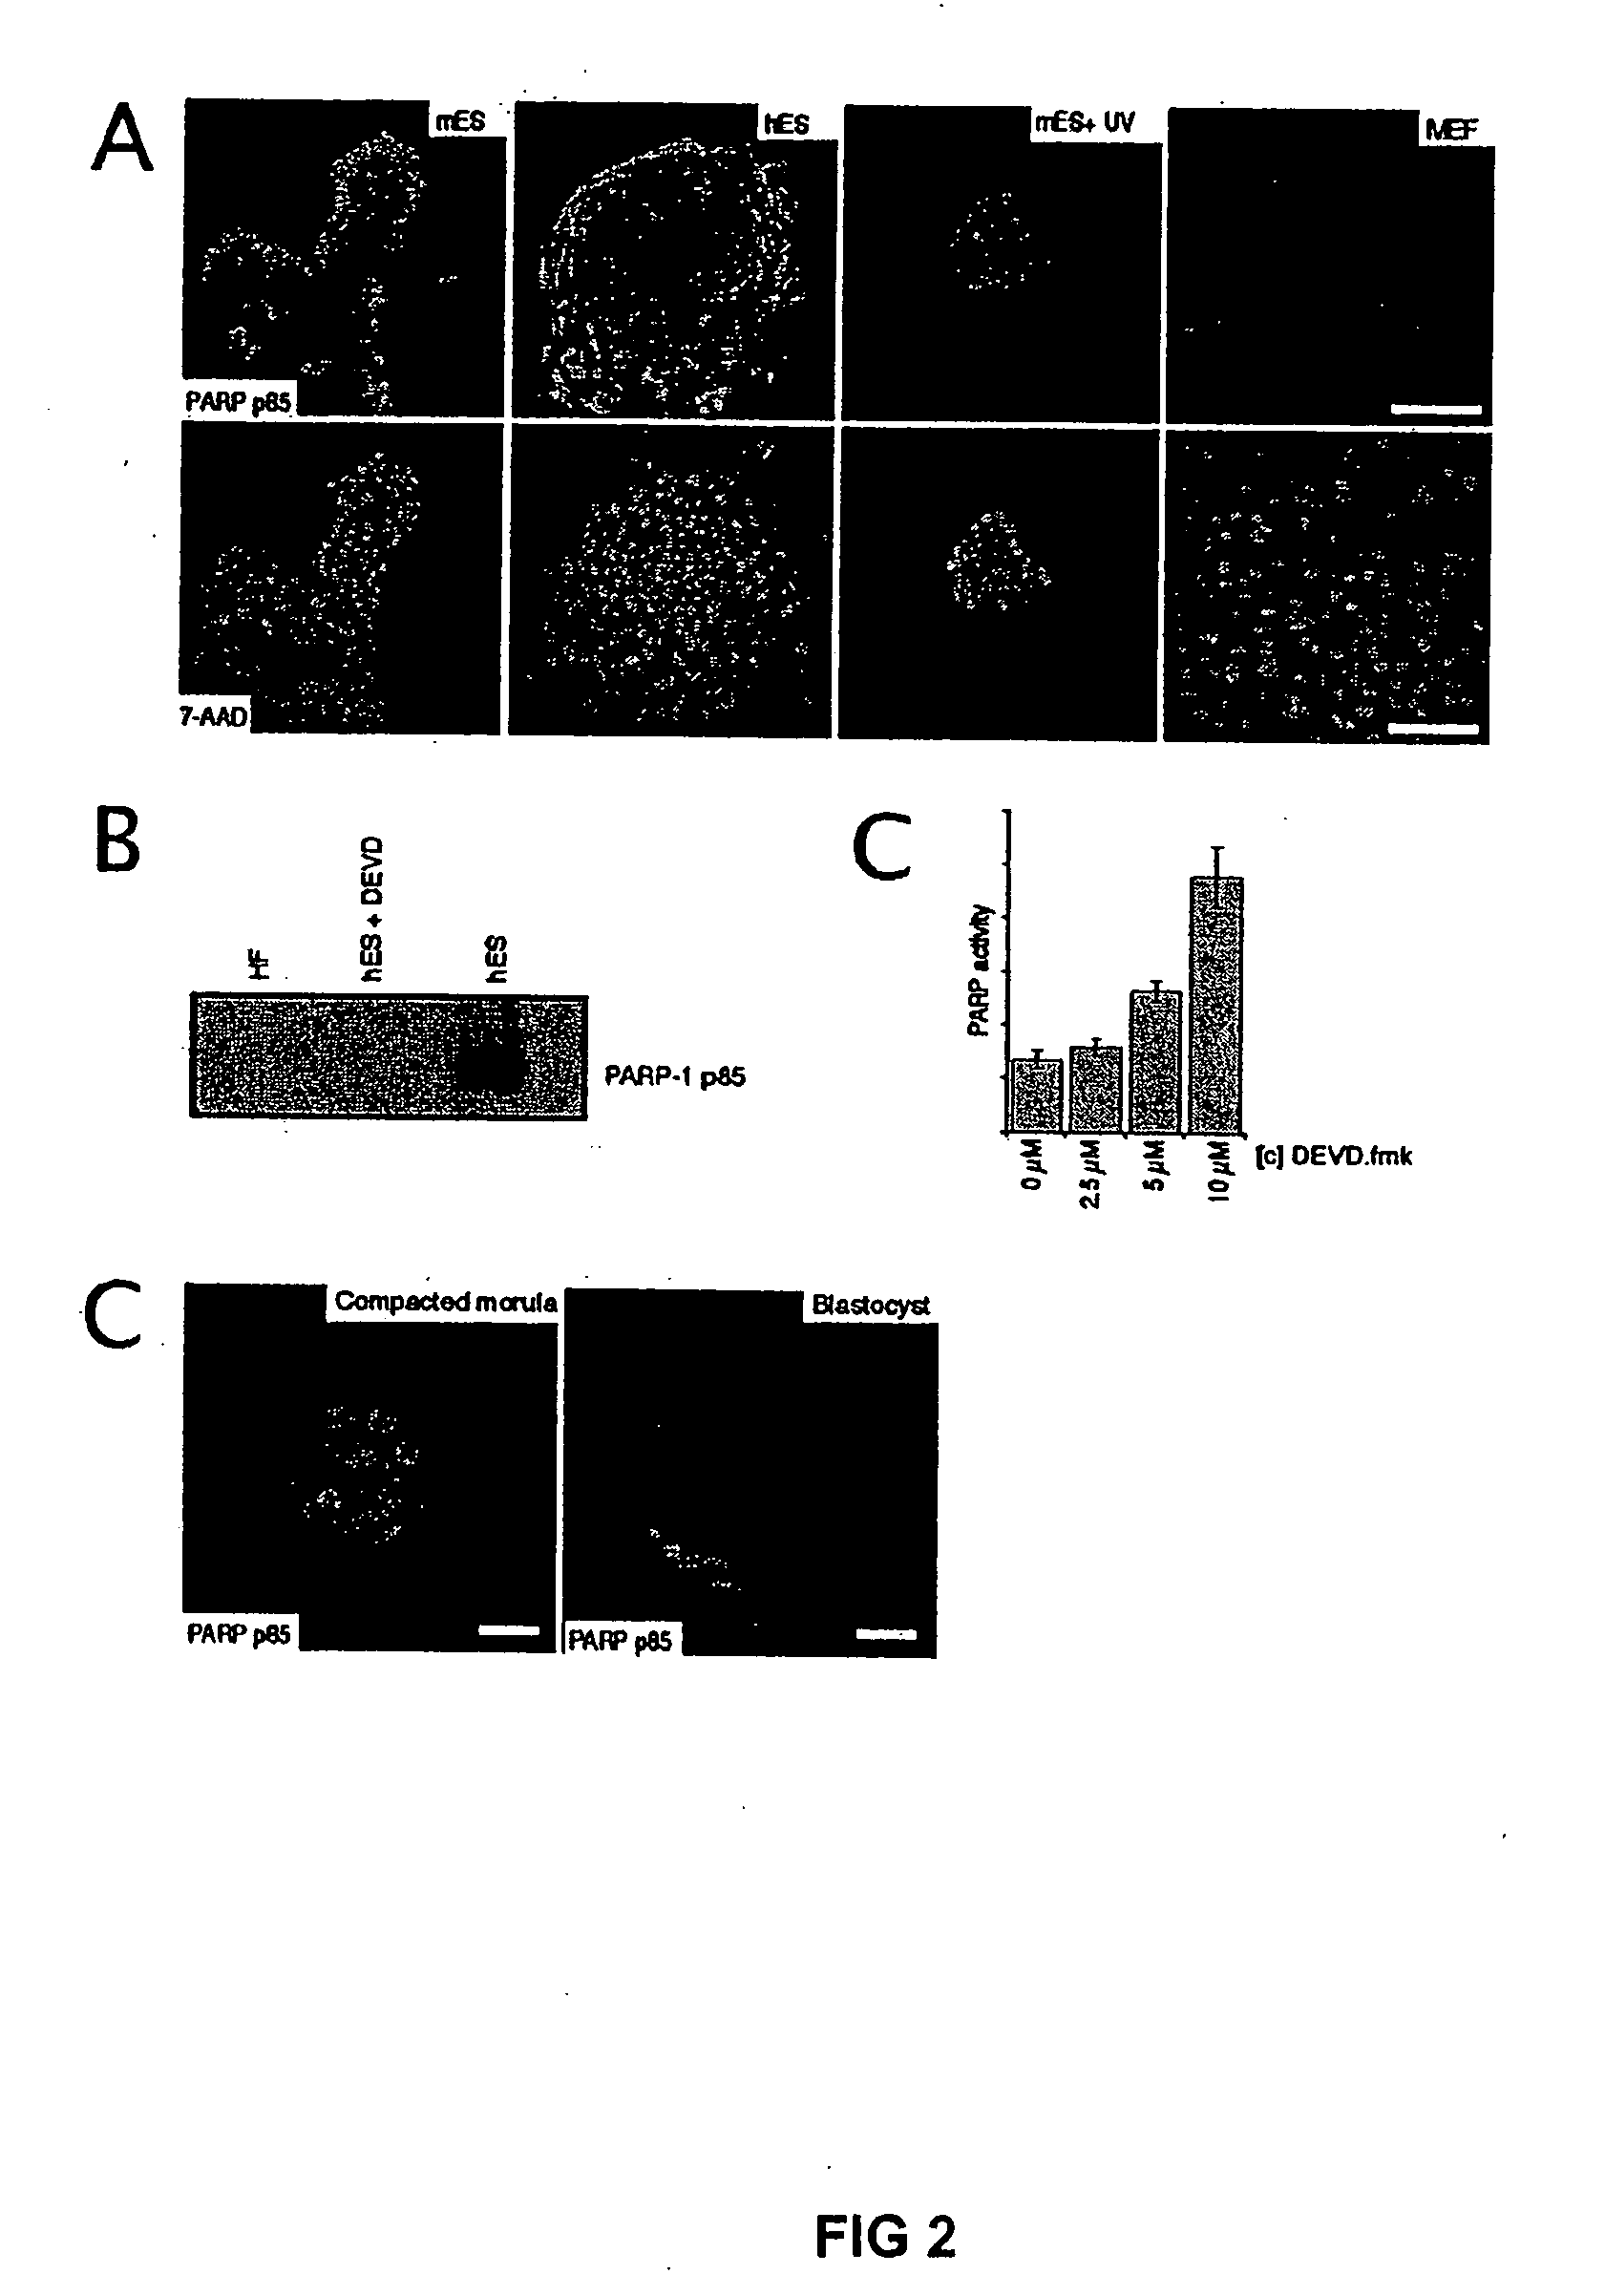 Differentiation of pluripotent embryonic stem cells